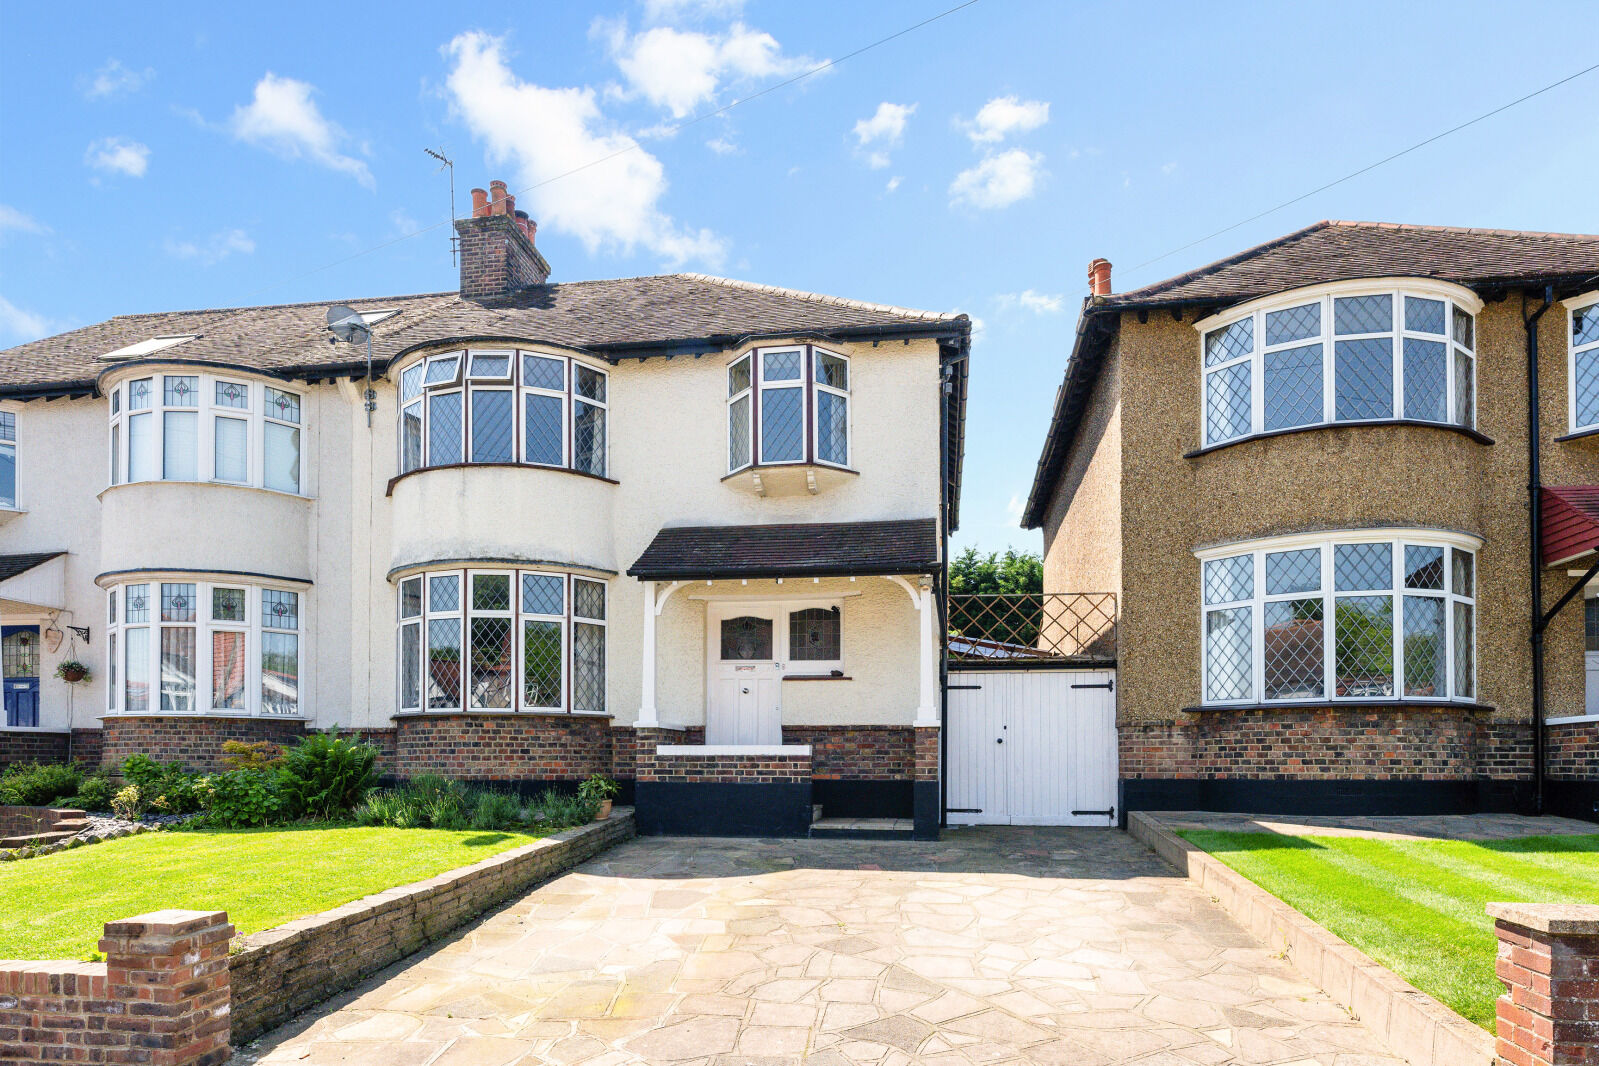 3 bedroom semi detached house for sale Wandle Road, Morden, SM4, main image